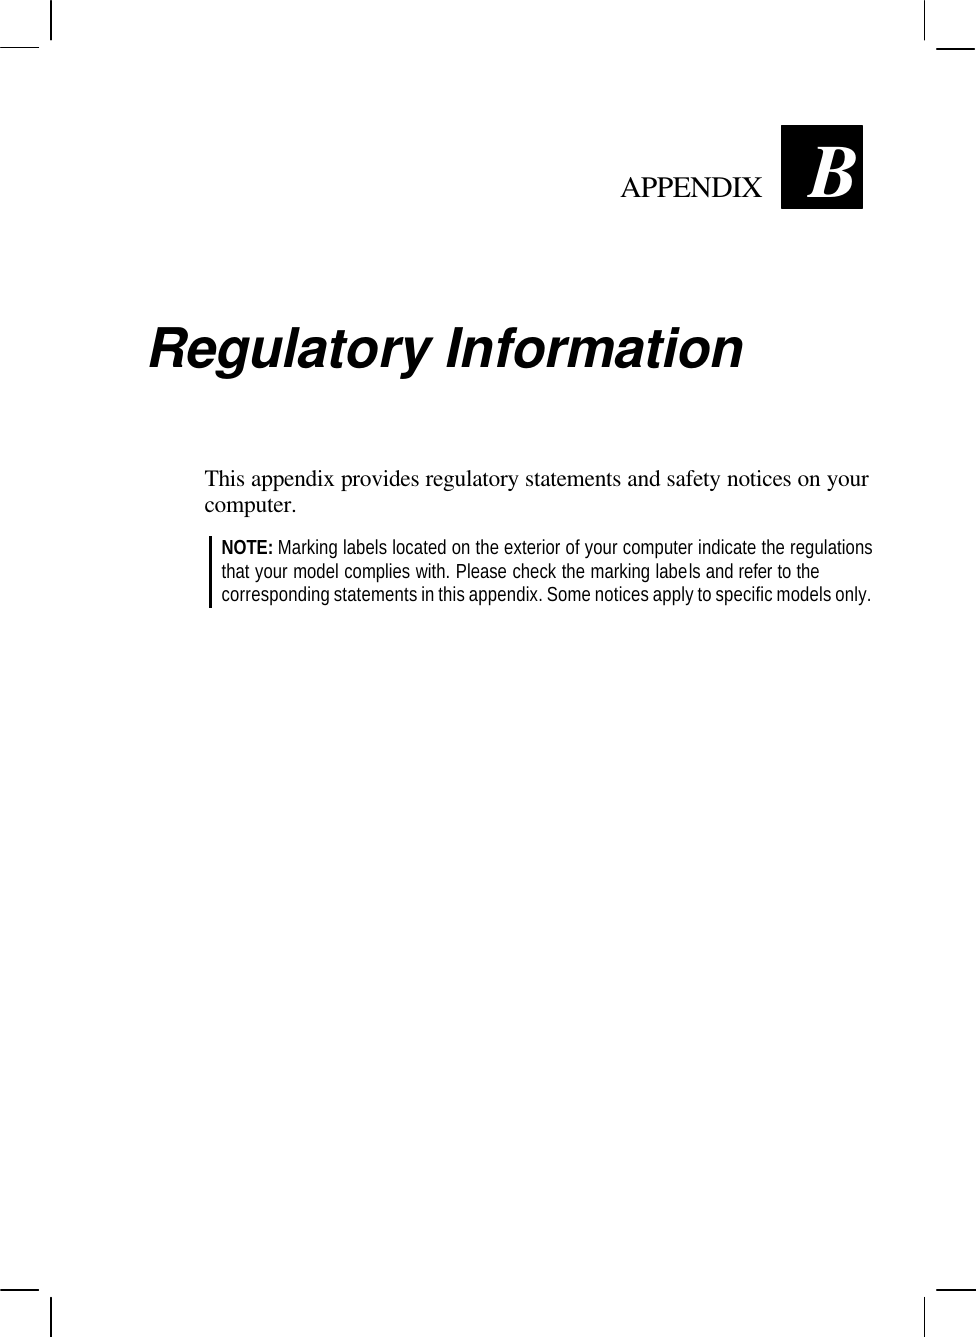   APPENDIX B Regulatory Information This appendix provides regulatory statements and safety notices on your computer. NOTE: Marking labels located on the exterior of your computer indicate the regulations that your model complies with. Please check the marking labels and refer to the corresponding statements in this appendix. Some notices apply to specific models only.  